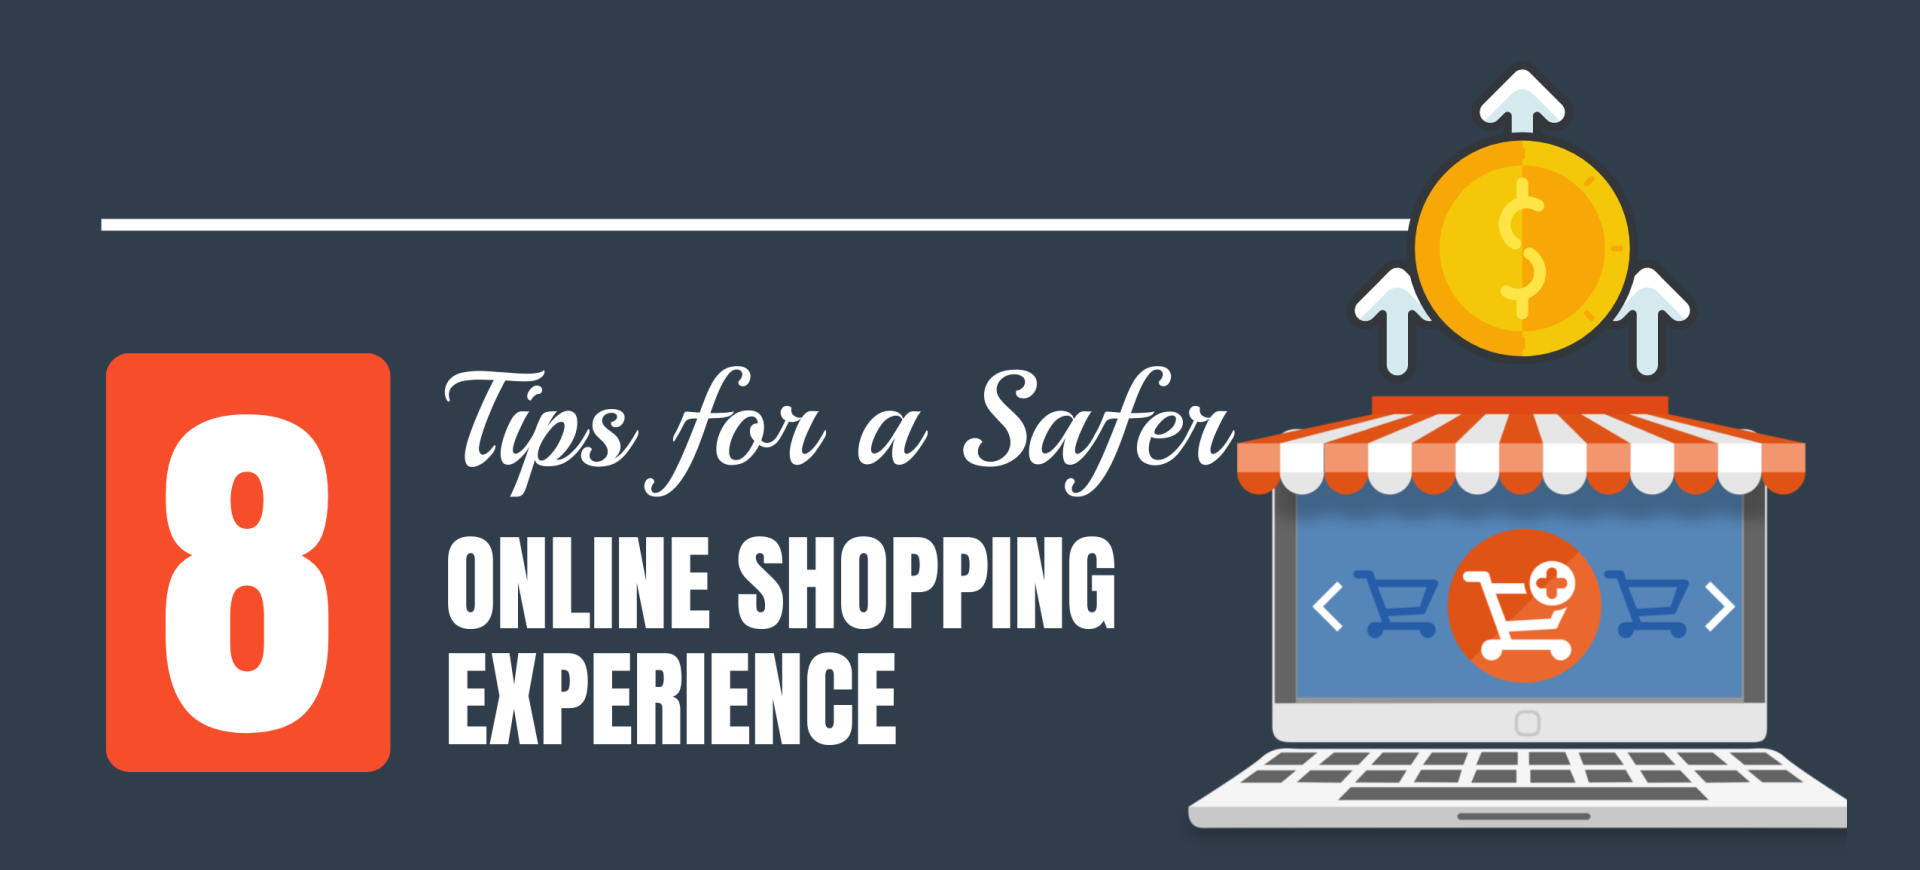 Follow These 8 Tips for a Safer Online Shopping Experience